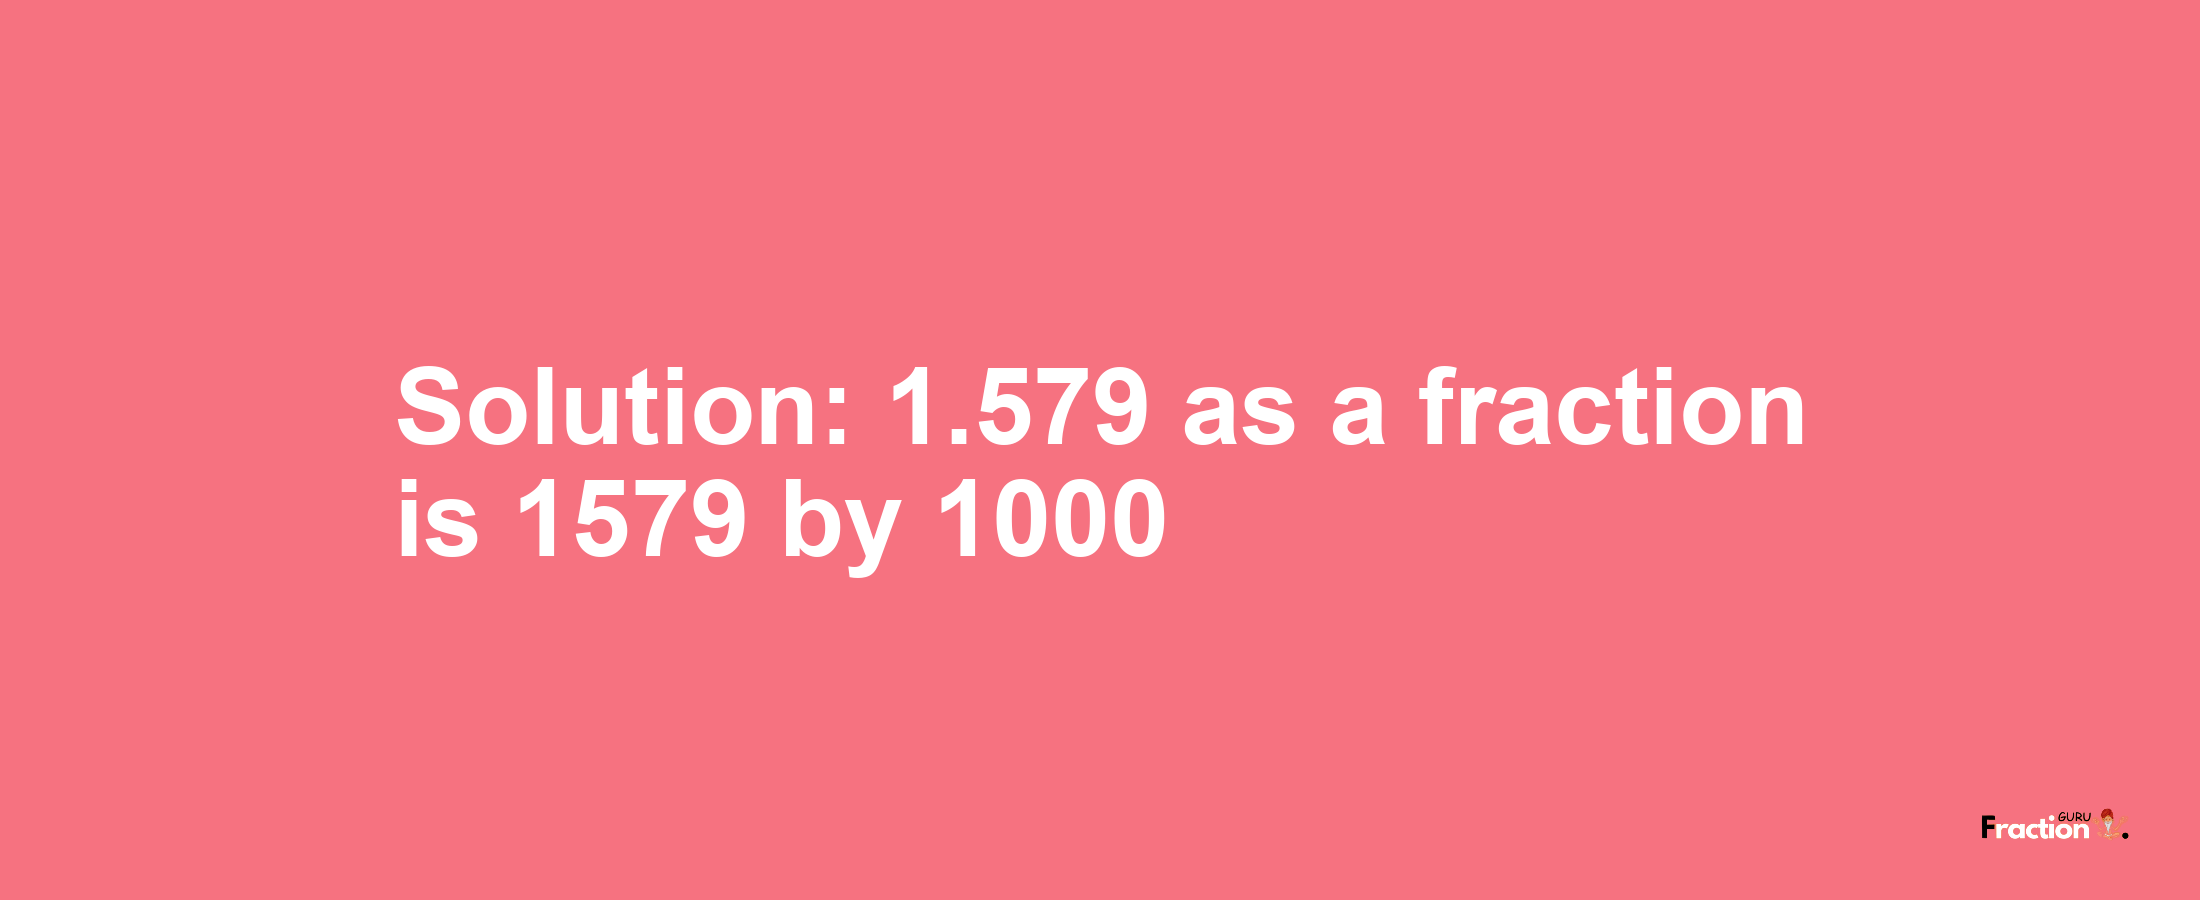 Solution:1.579 as a fraction is 1579/1000